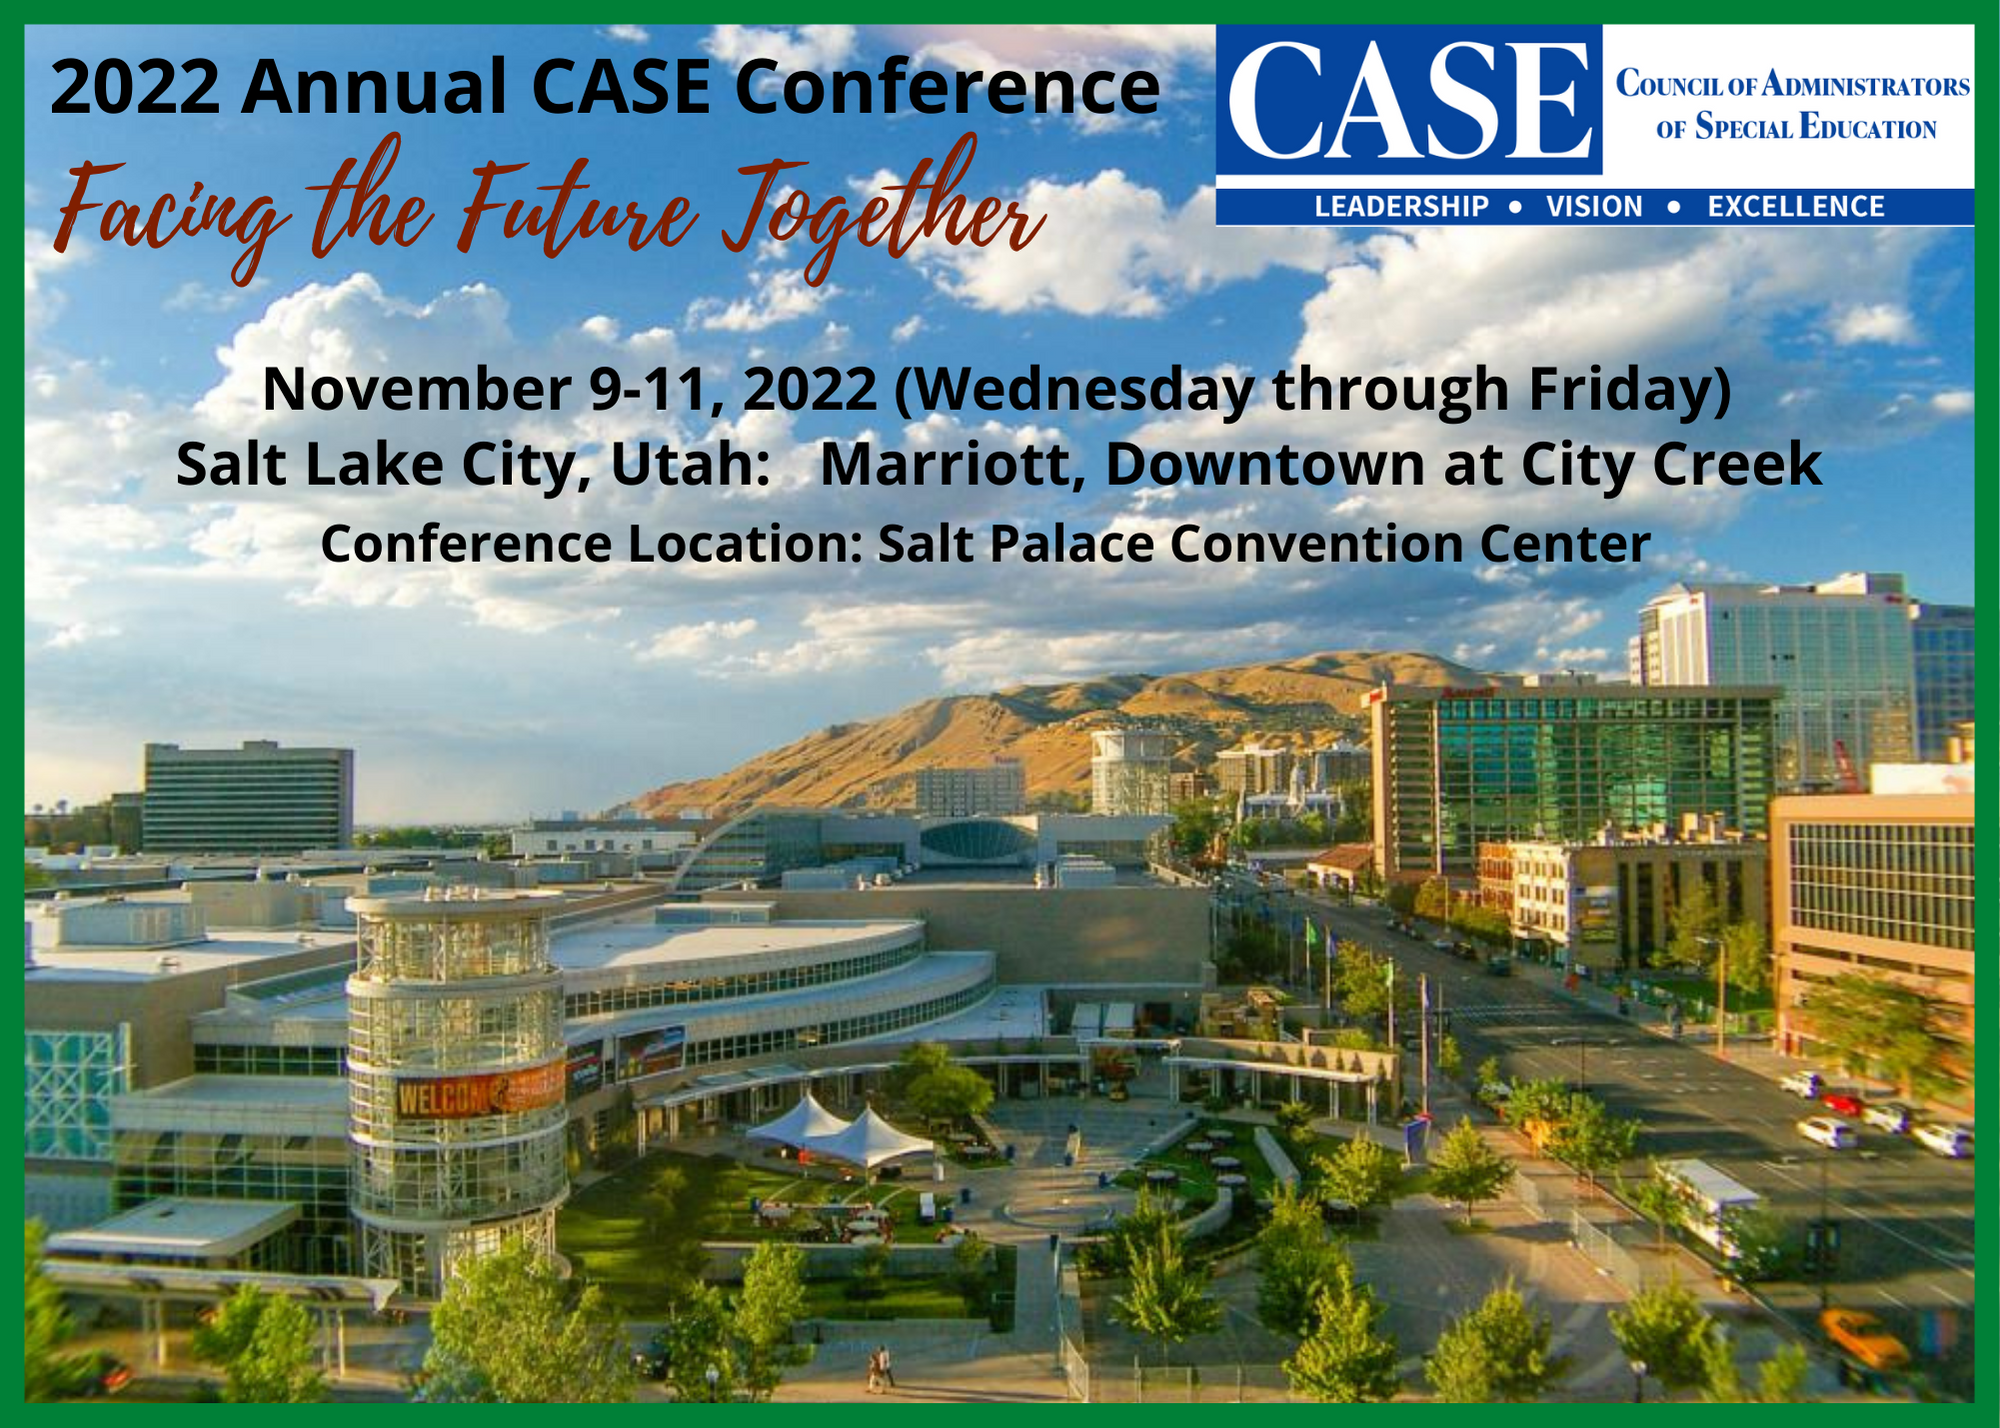 Image of Salt Lake City with text saying 2022 Annual CASE Conference Facing the Future Together November 9-11 